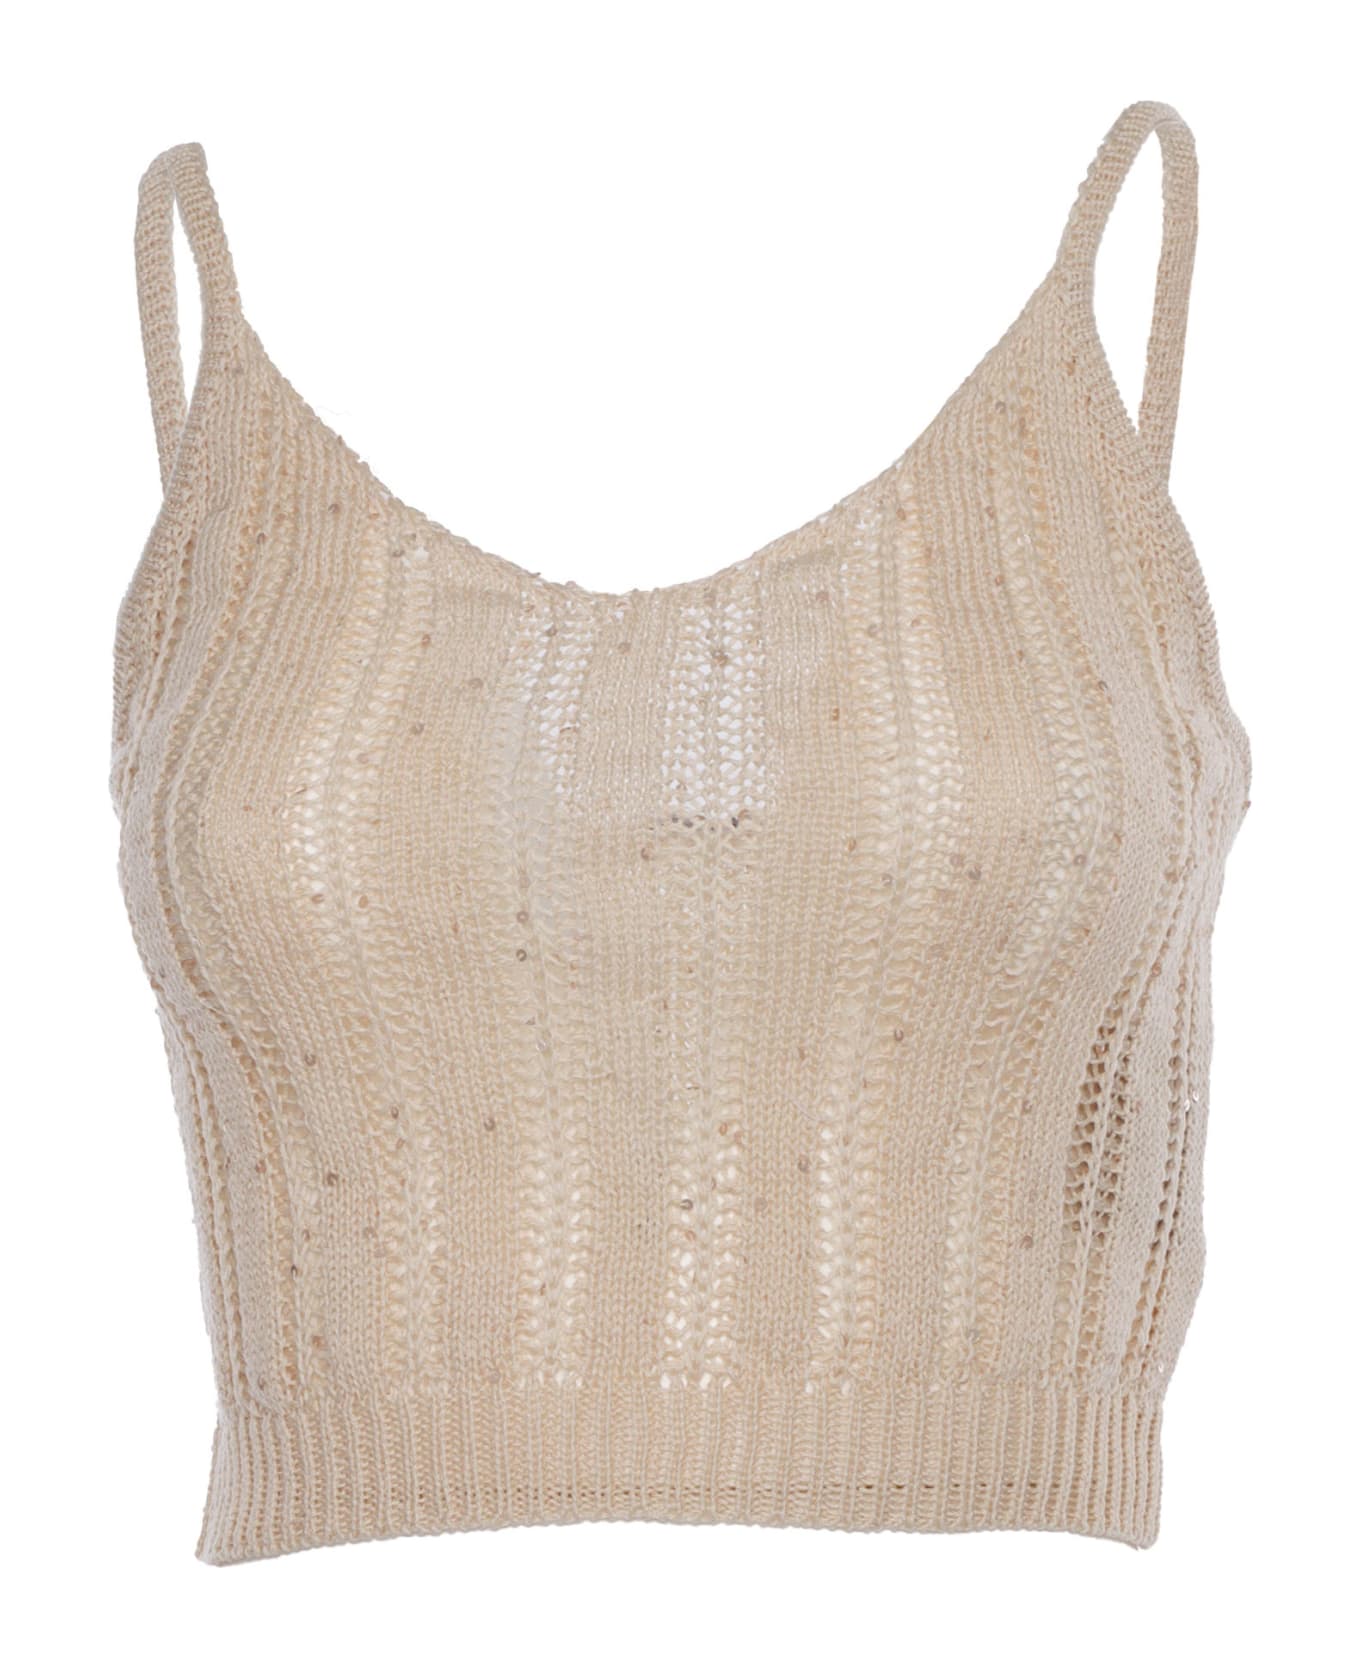 Peserico Knitted Top - CREAM